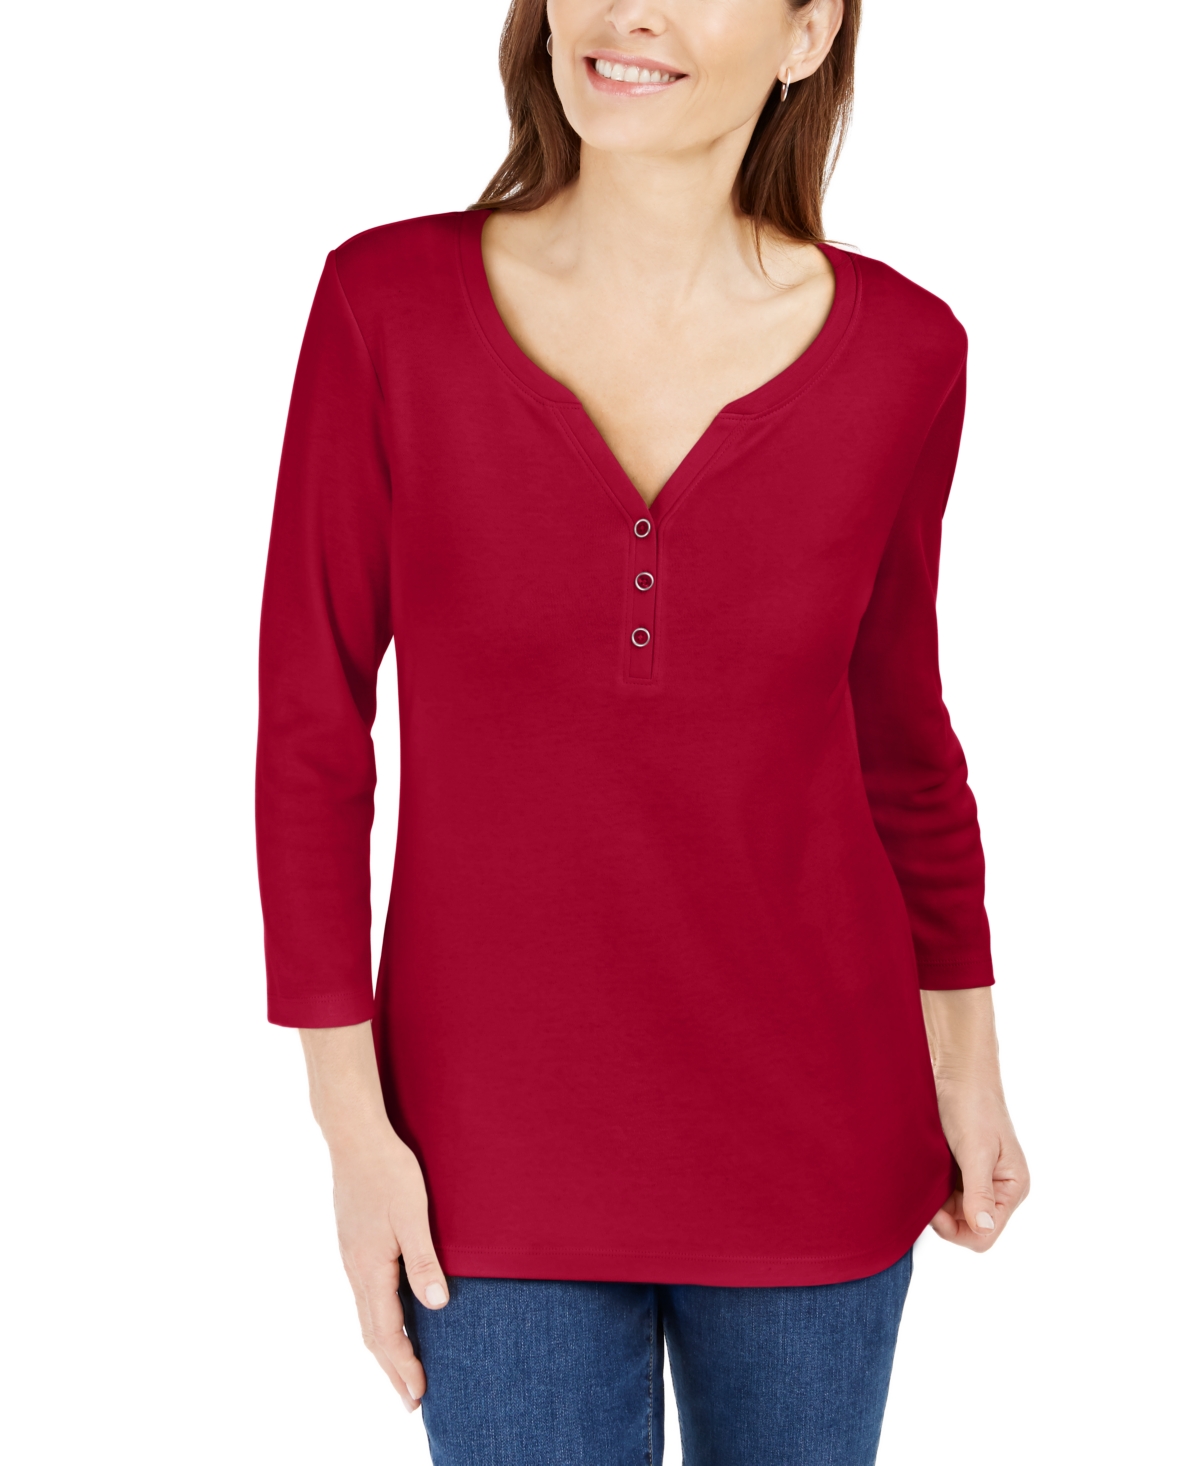 Petite 3/4-Sleeve Henley Shirt, Created for Macy's - Intrepid Blue